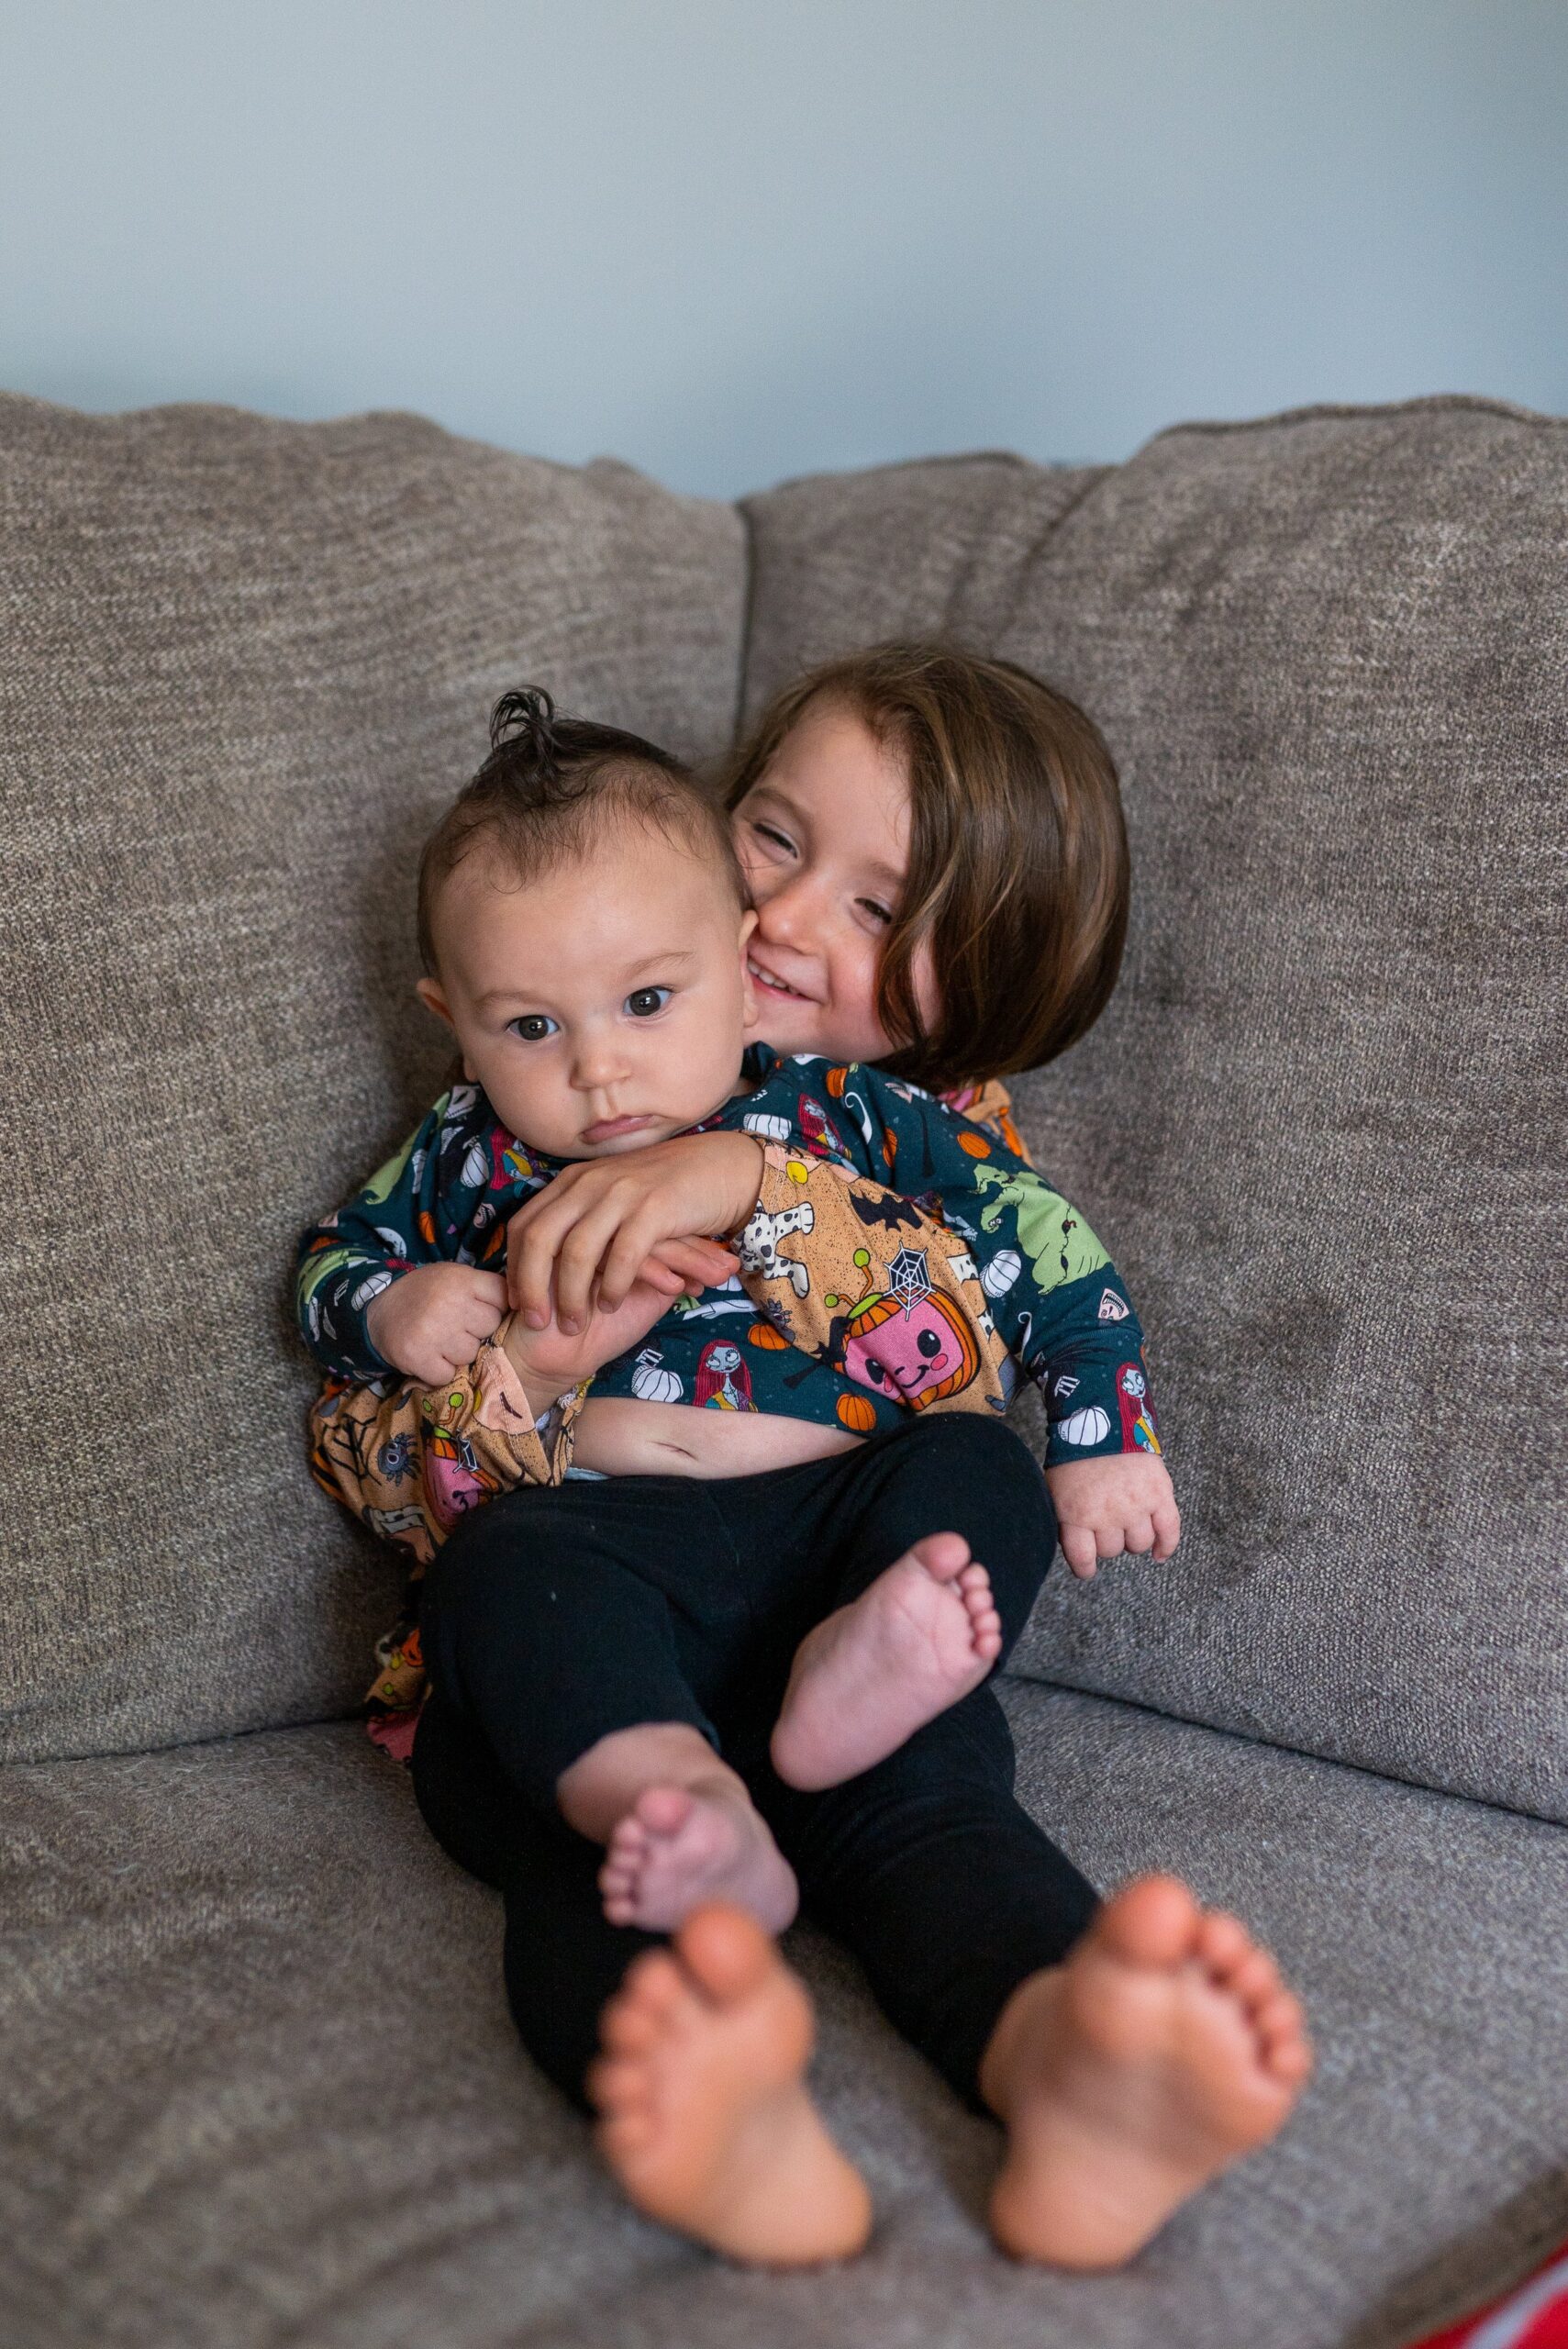 little girl hugging her brother on the couch while brother looks the other way